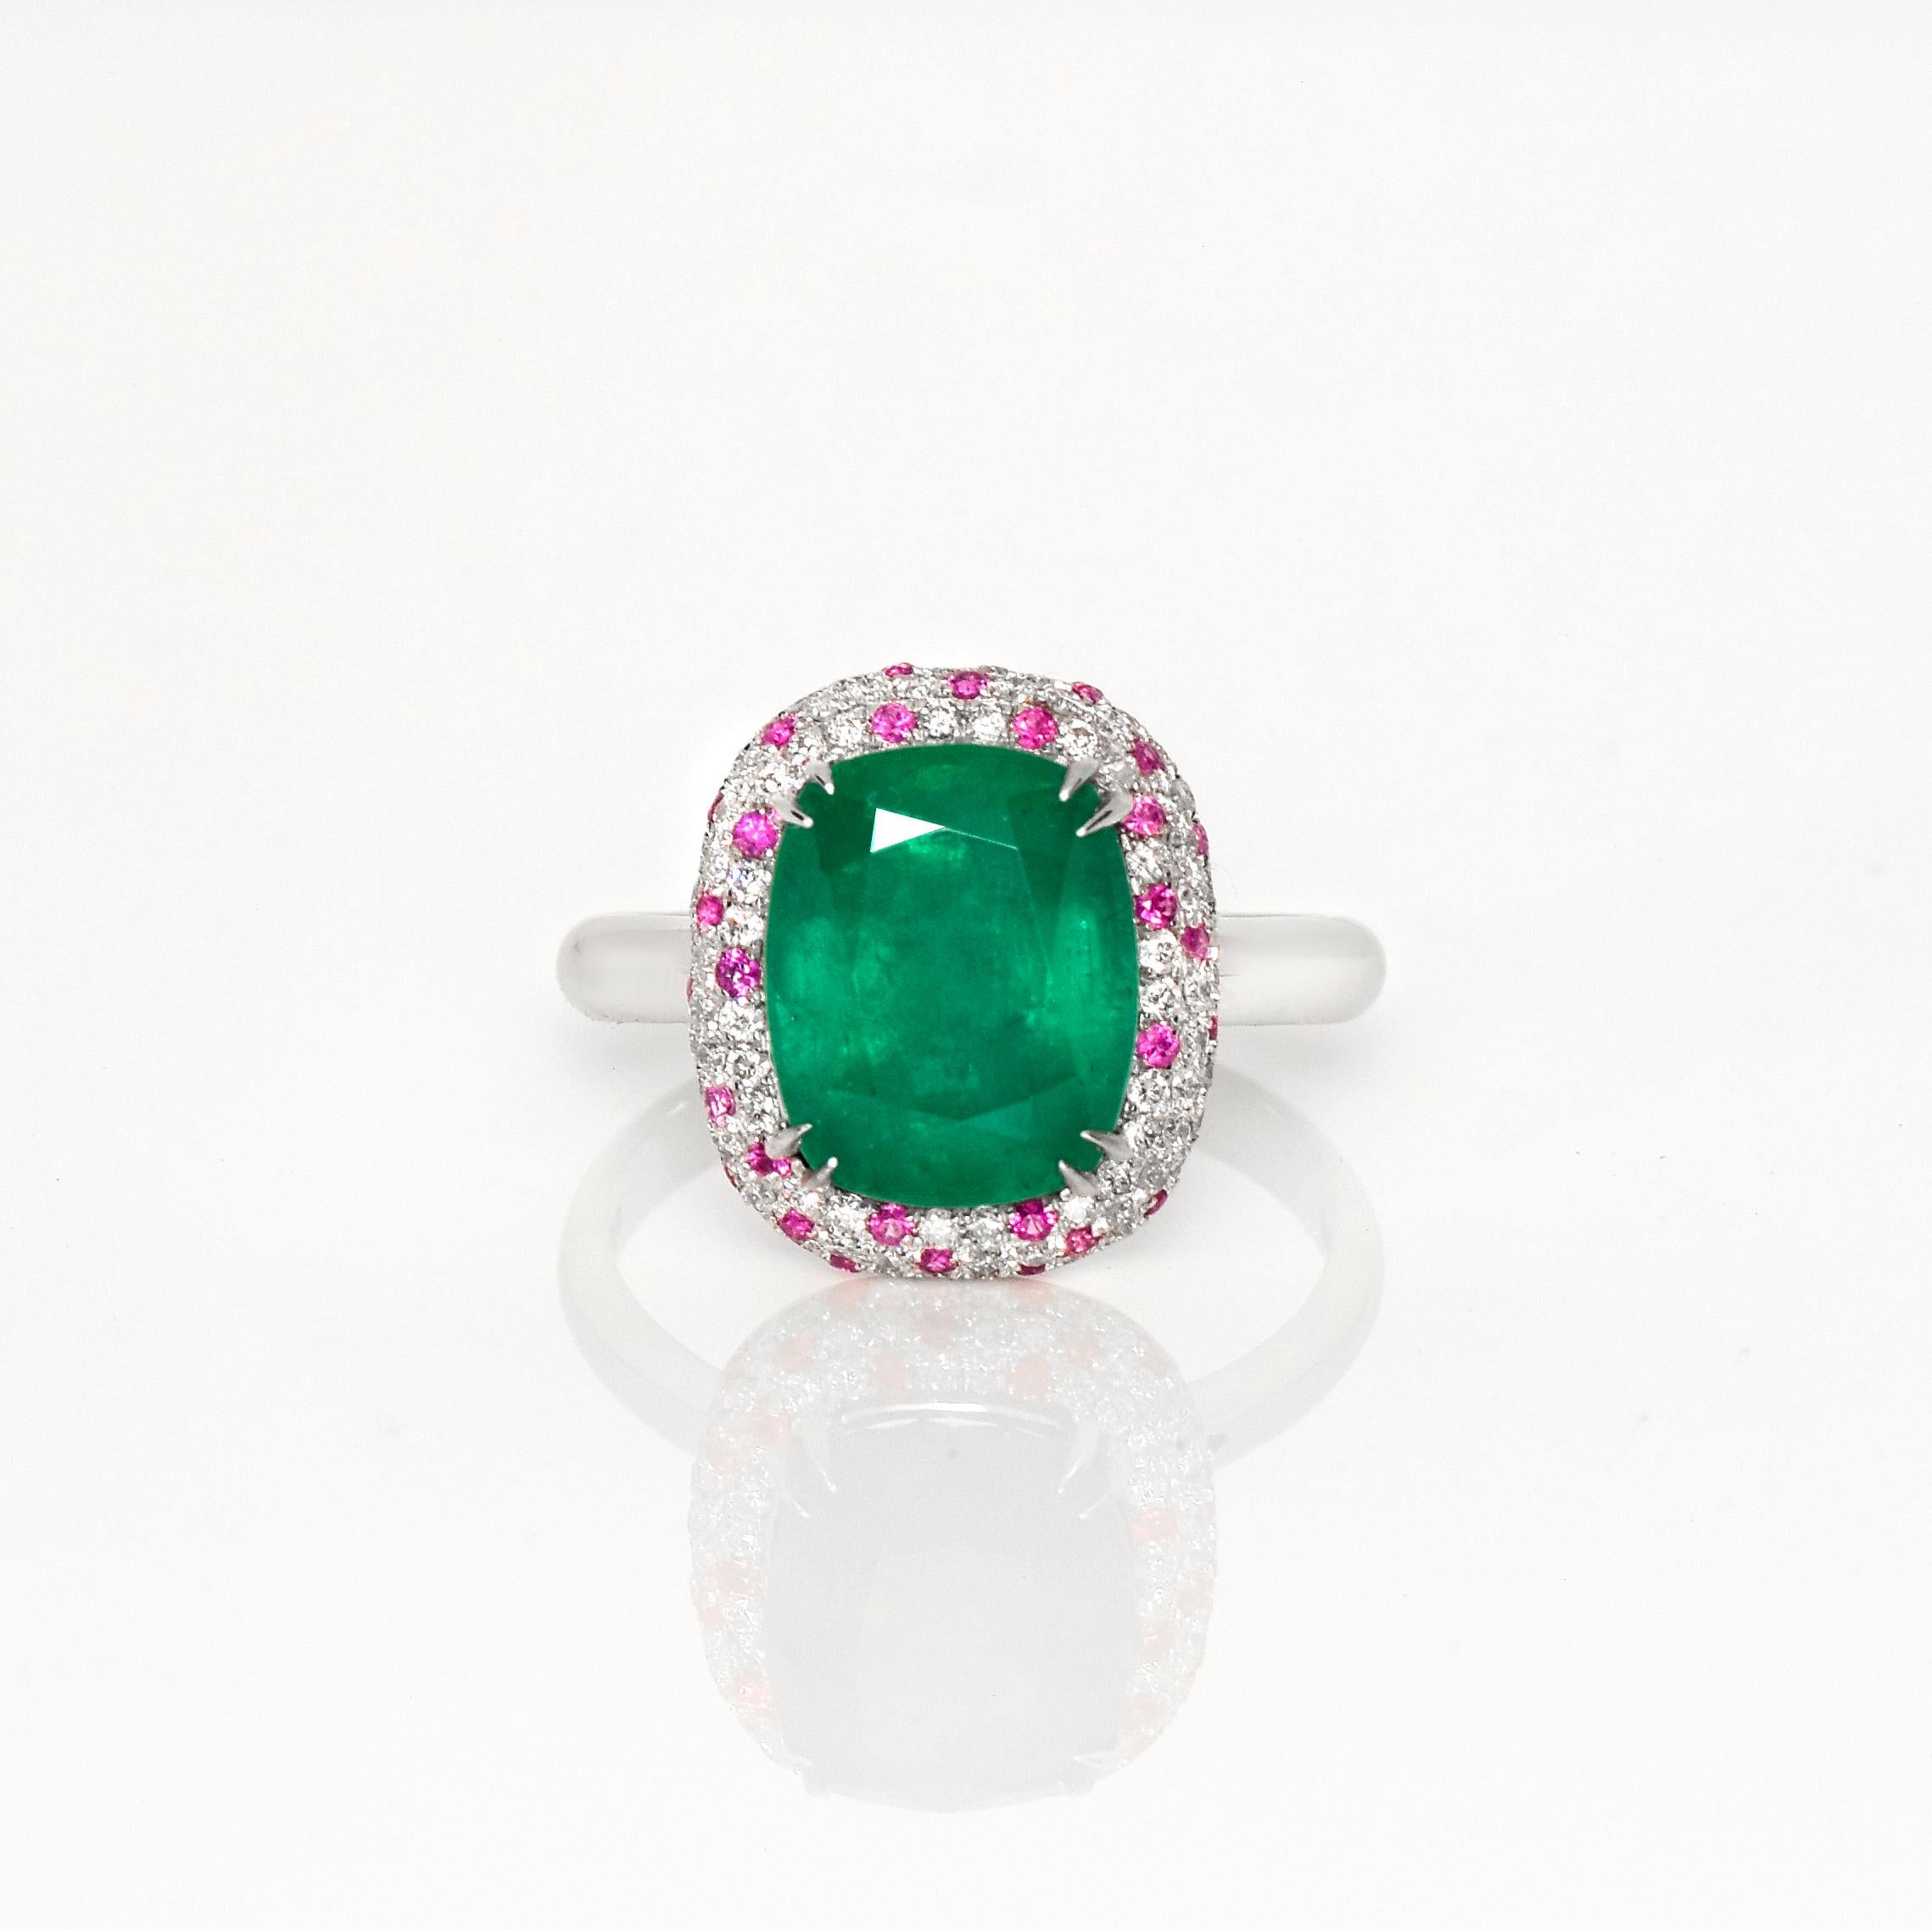 * IGI 14k 3.65 ct Rarest No Oiled Emerald Antique Art Deco Engagement Ring*

This stunning piece of jewelry features a 3.65-carat rare, natural, IGI-certified emerald as the center stone. The emerald has a beautiful bluish-green hue and has not been